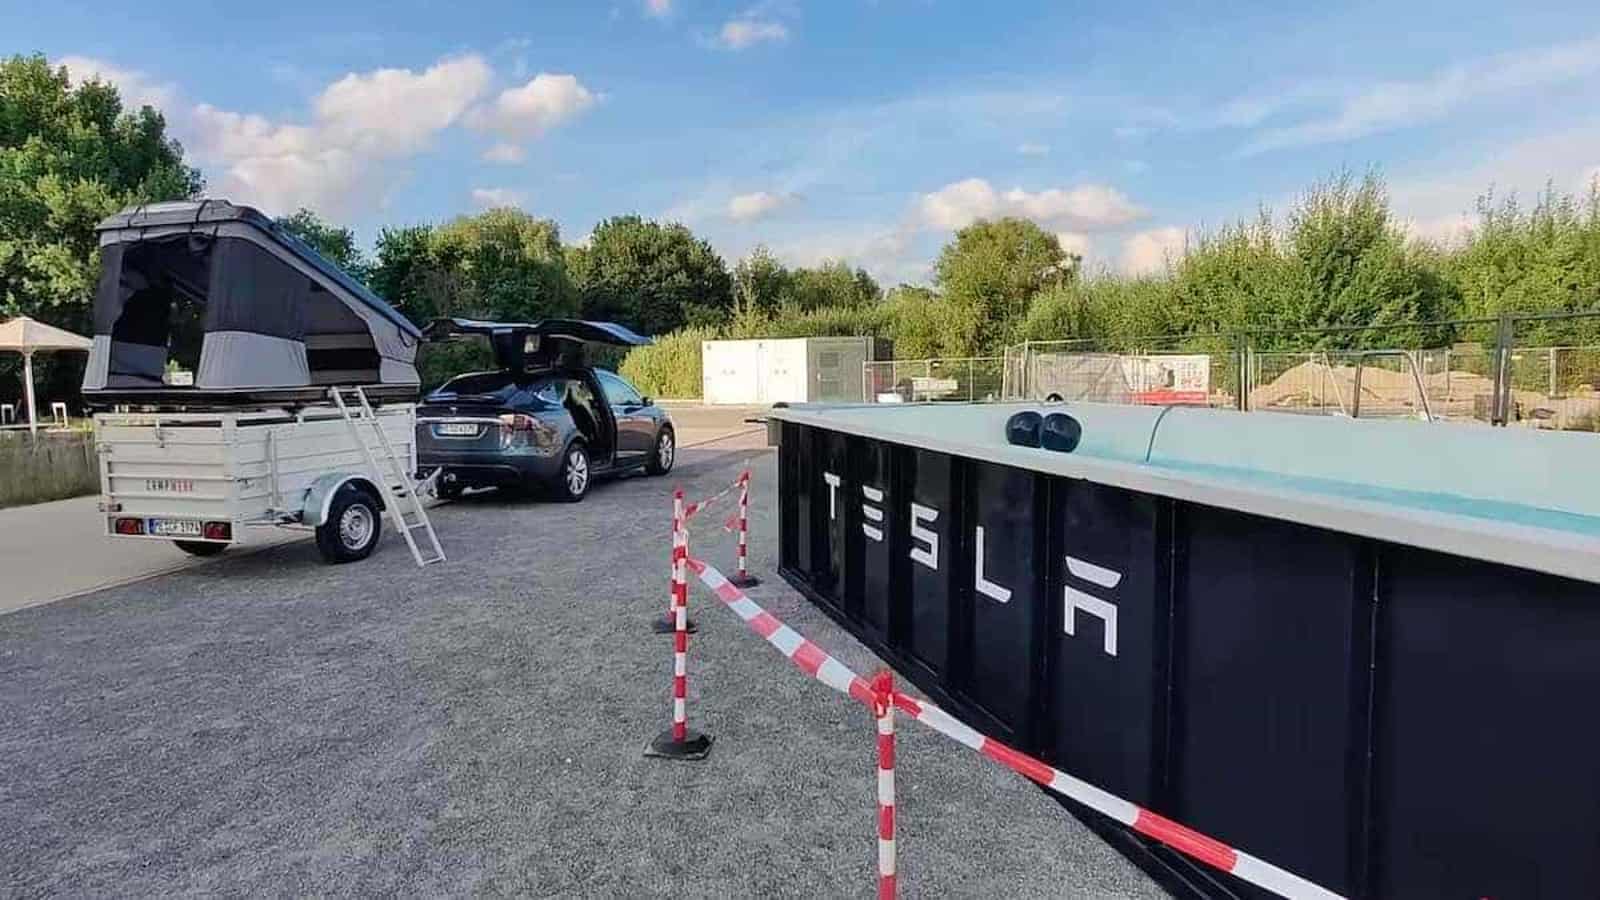 Tesla Wants You To Sit in a Wet Dumpster While Your Car Charges